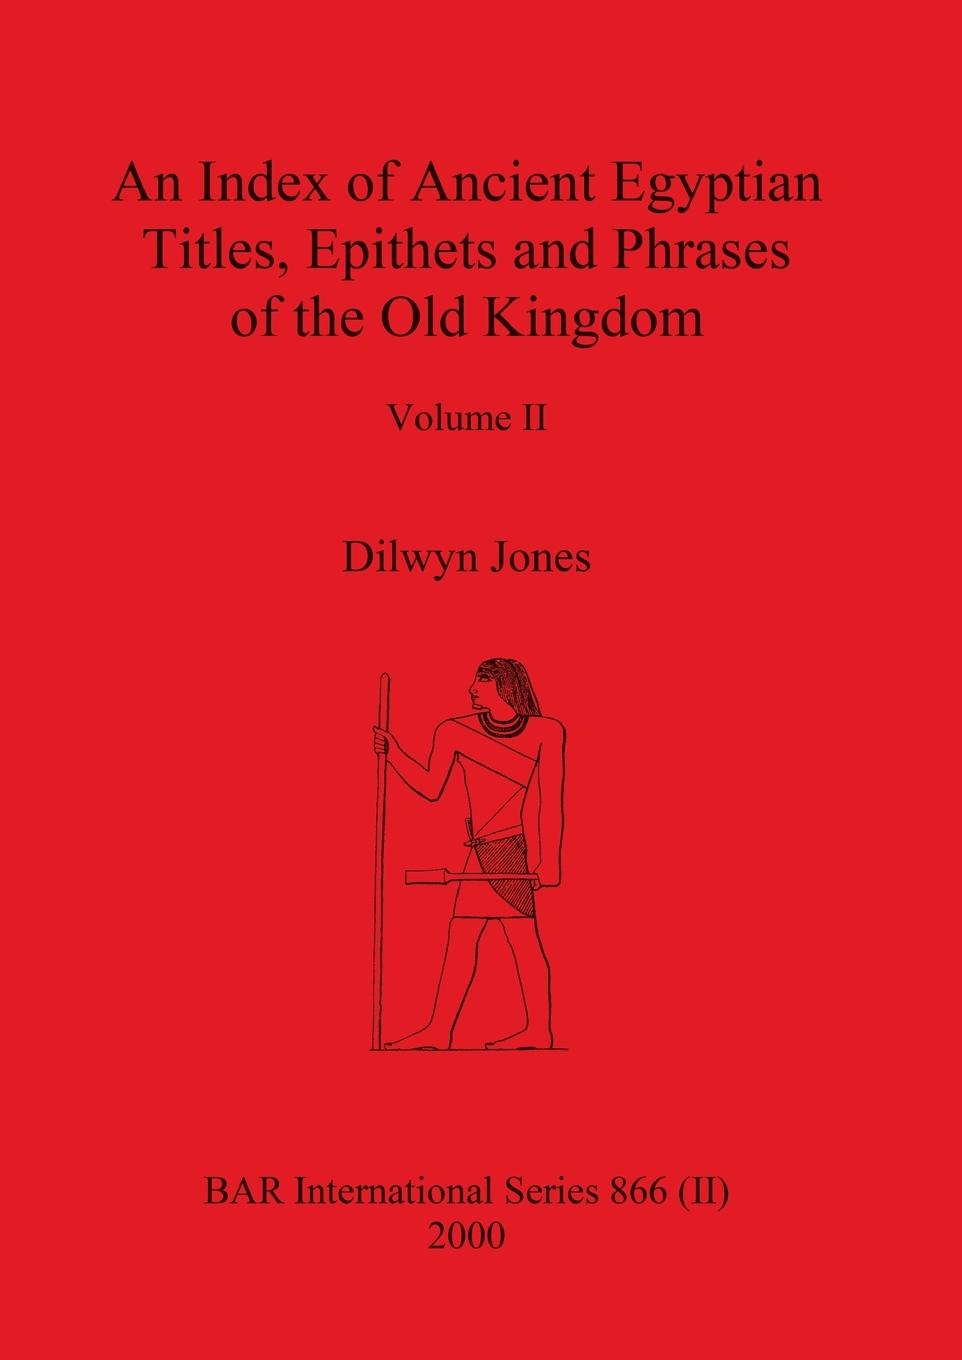 An Index of Ancient Egyptian Titles, Epithets and Phrases of the Old Kingdom Volume II - Jones, Dilwyn